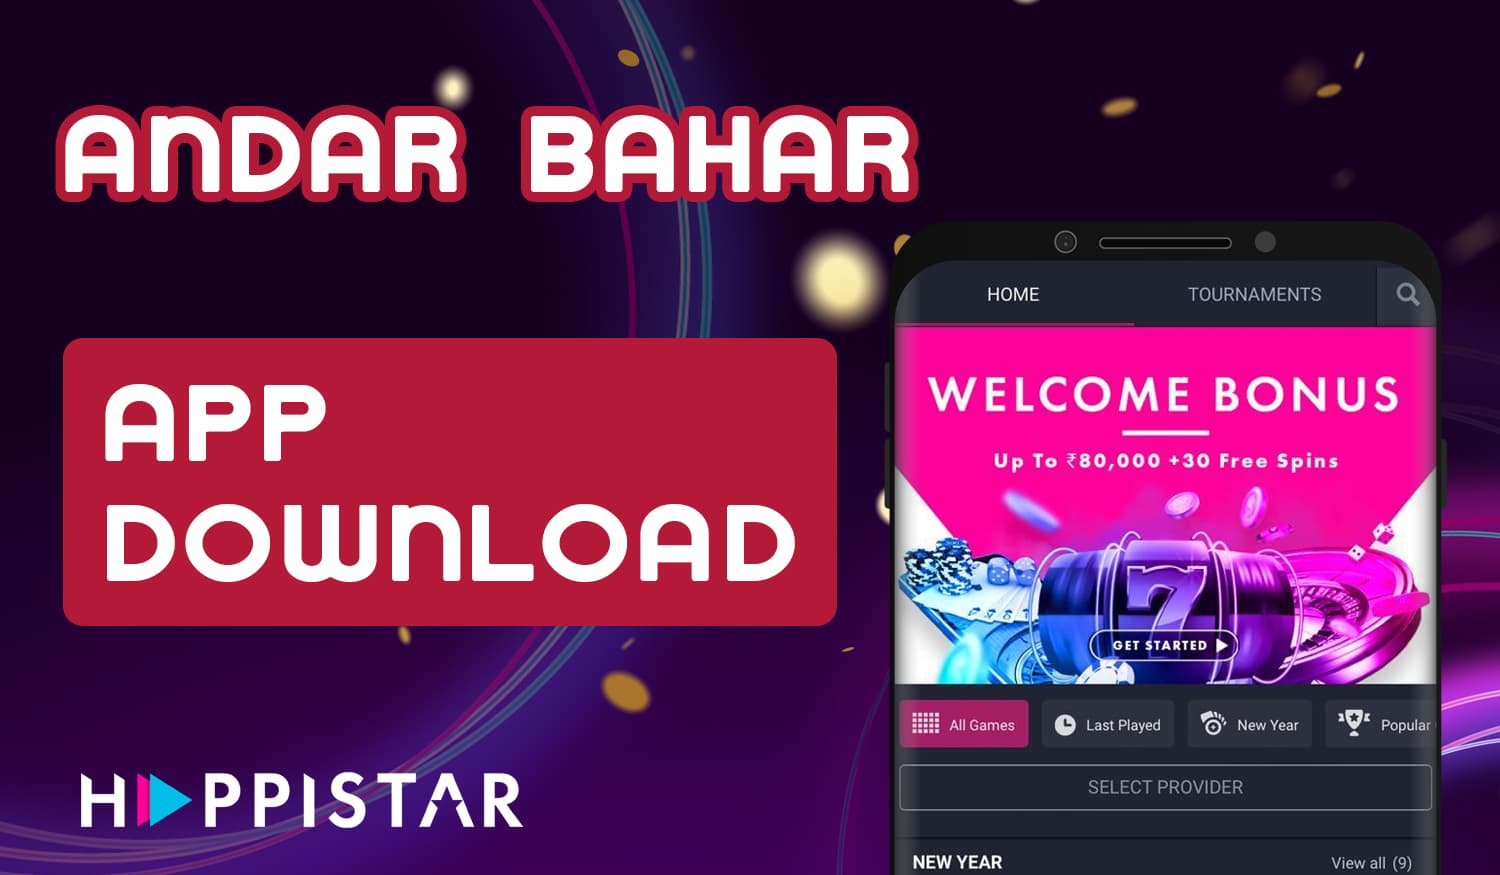 How Happistar users from India can download and install the mobile app